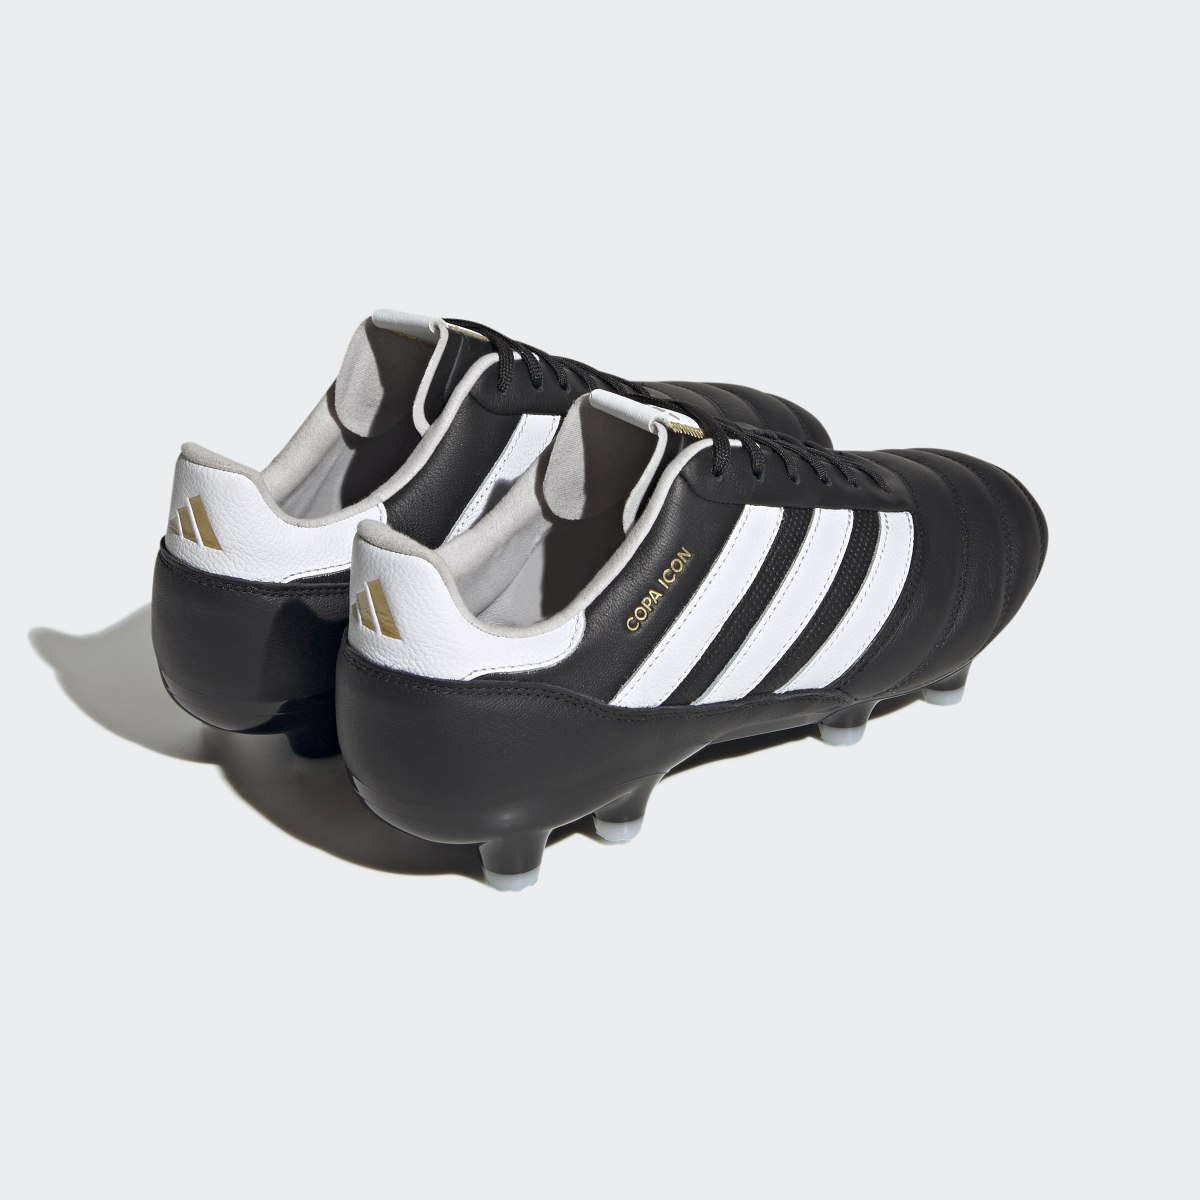 Adidas Copa Icon Firm Ground Soccer Cleats. 9